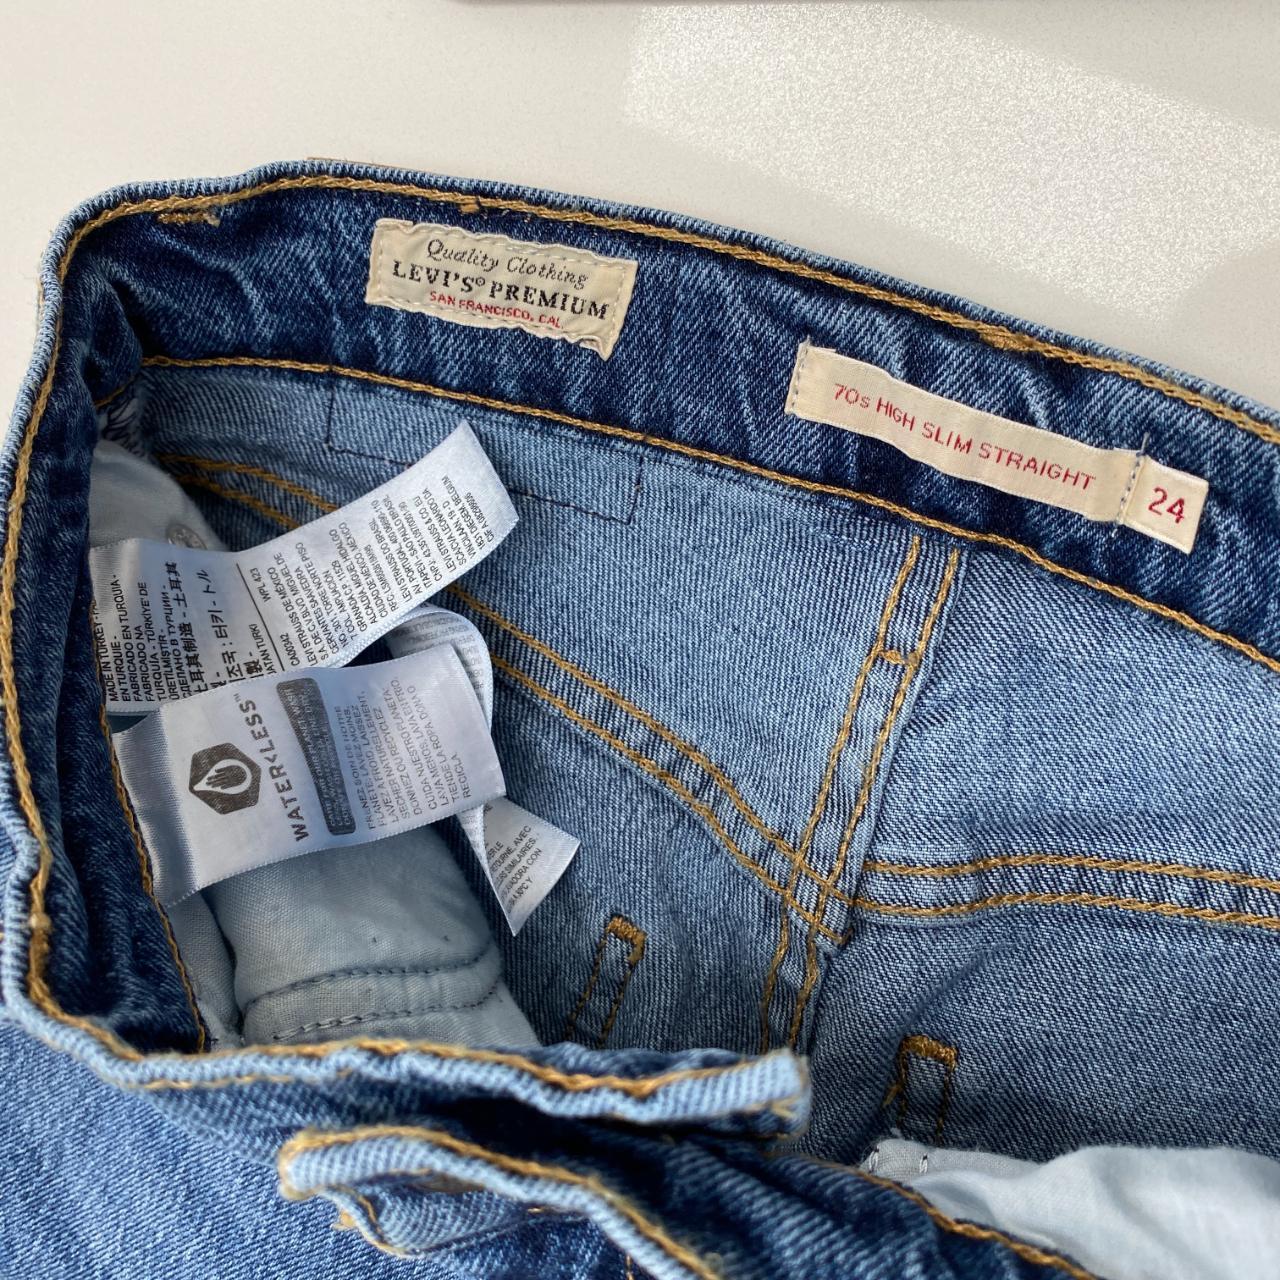 LEVIS - New without tags - LEVI'S 70S HIGH STRAIGHT... - Depop